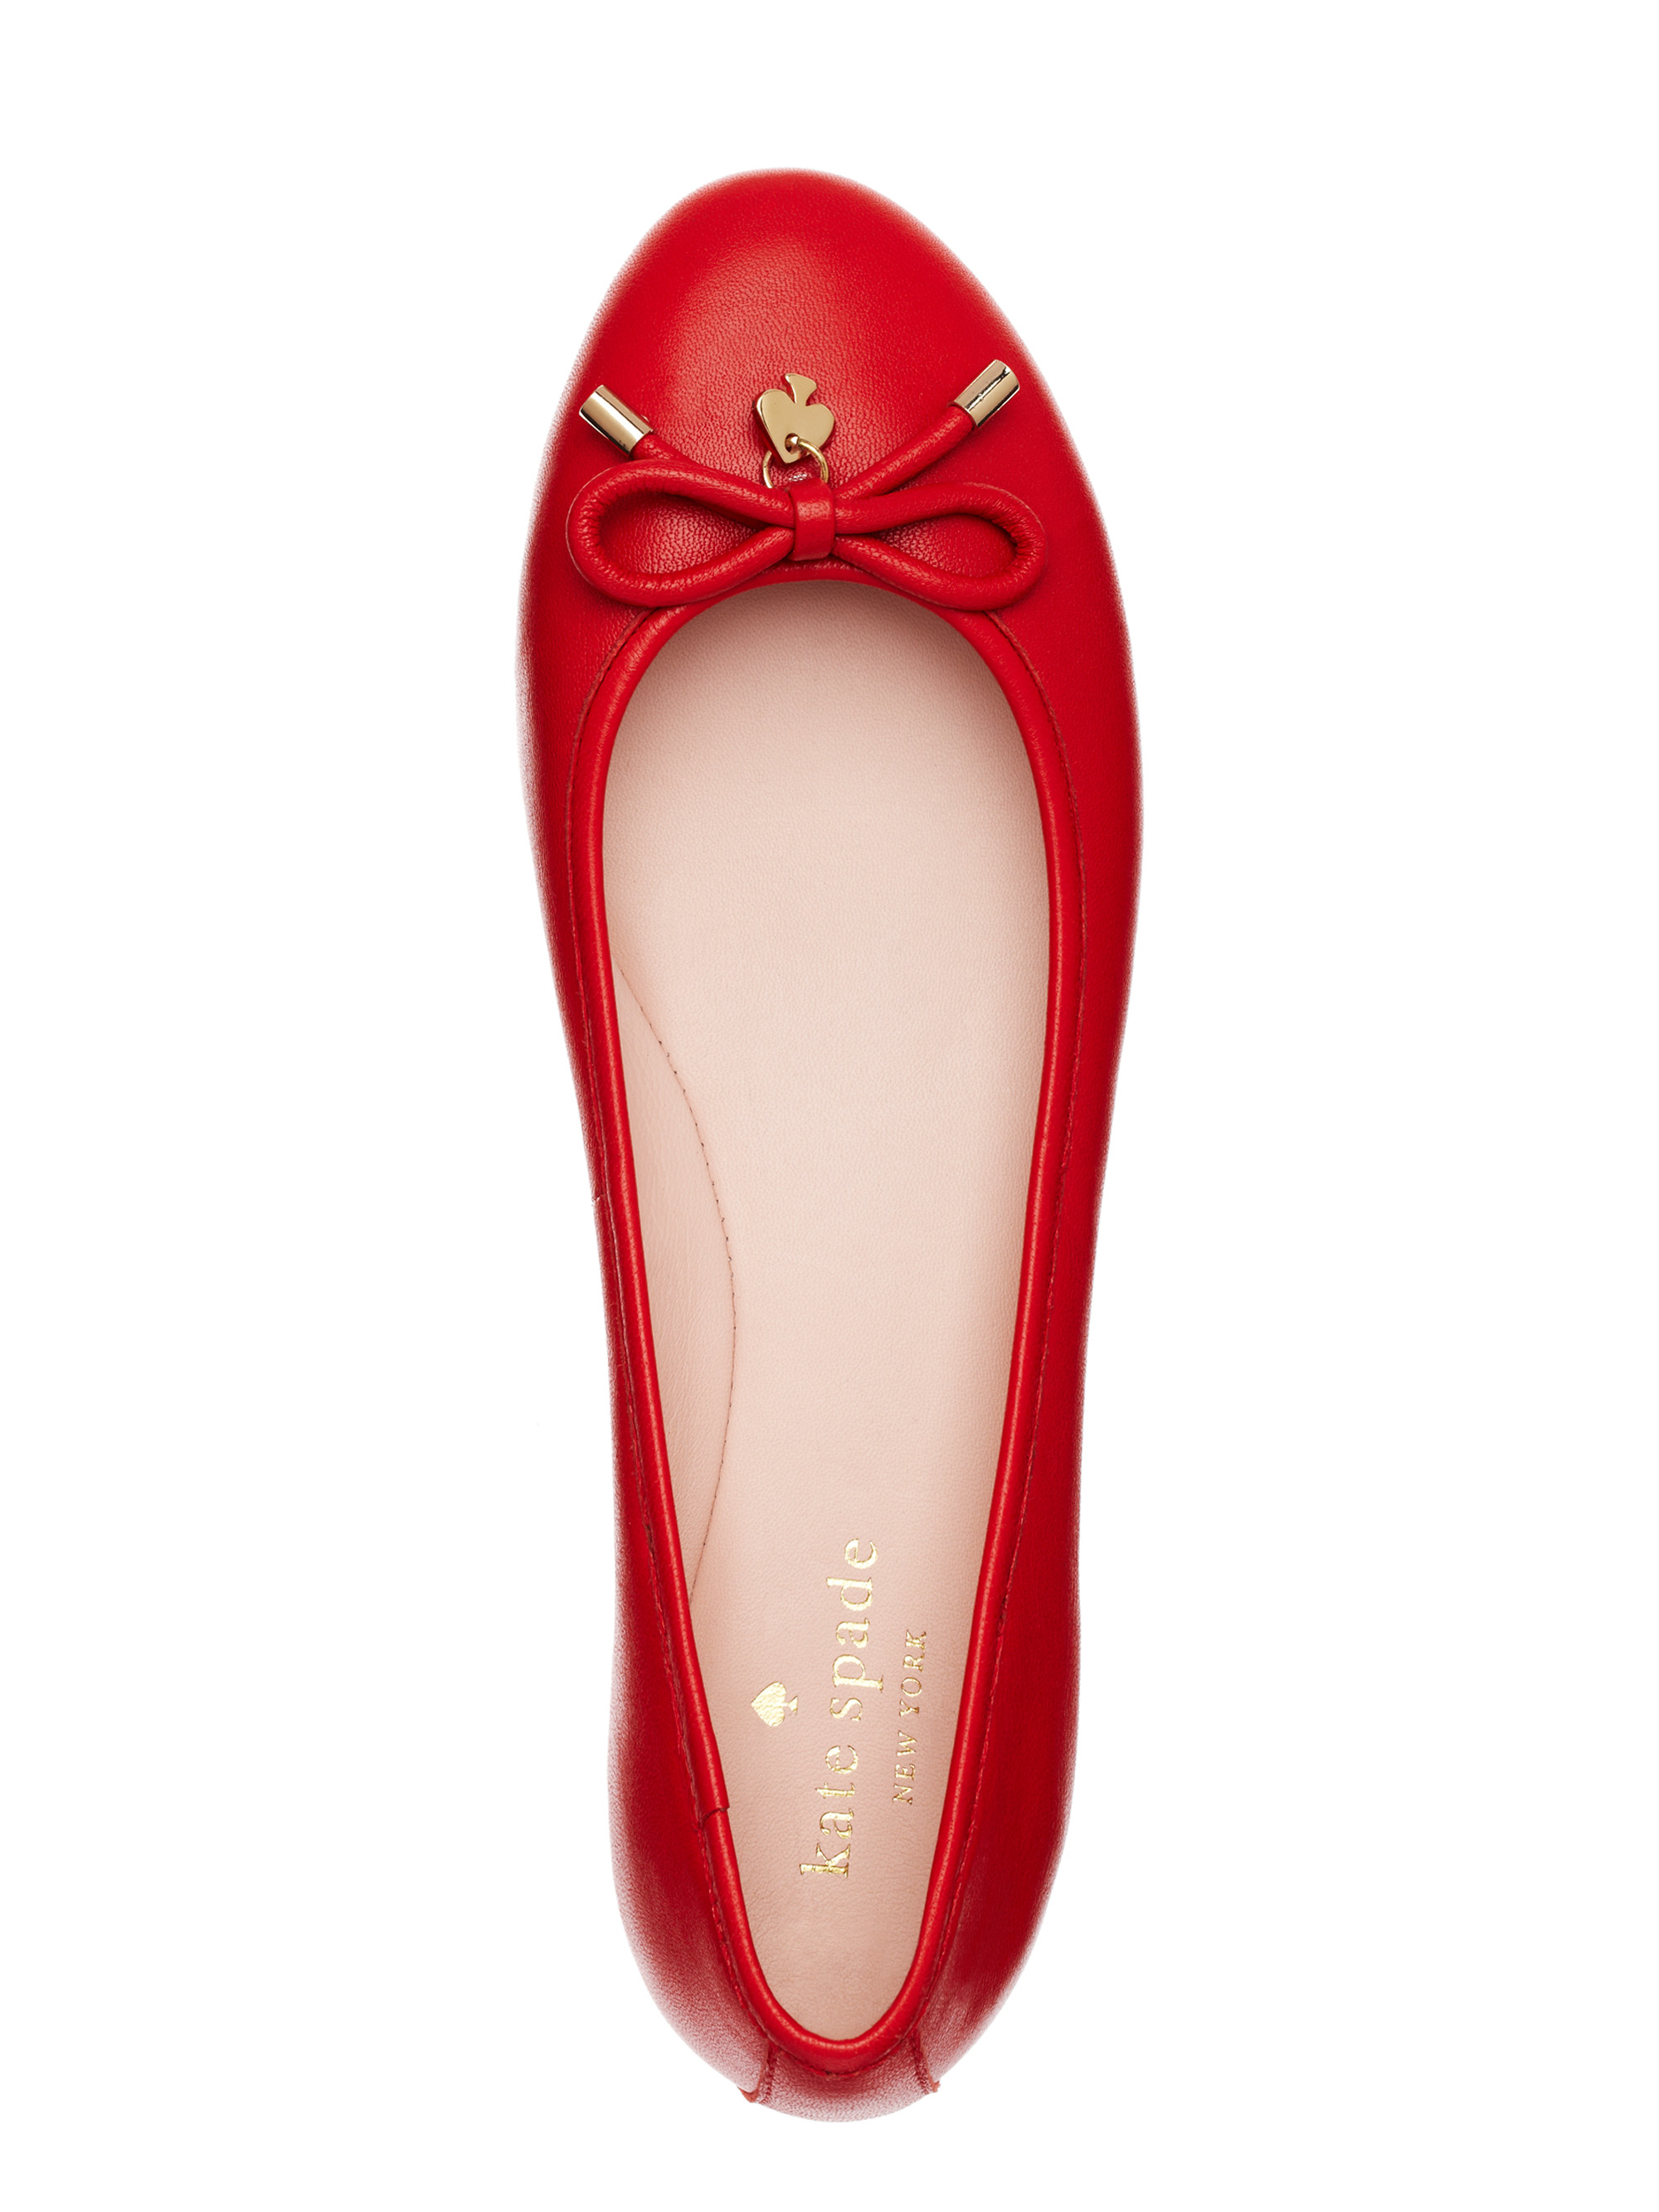 Kate Spade Willa Flats in Red - Lyst